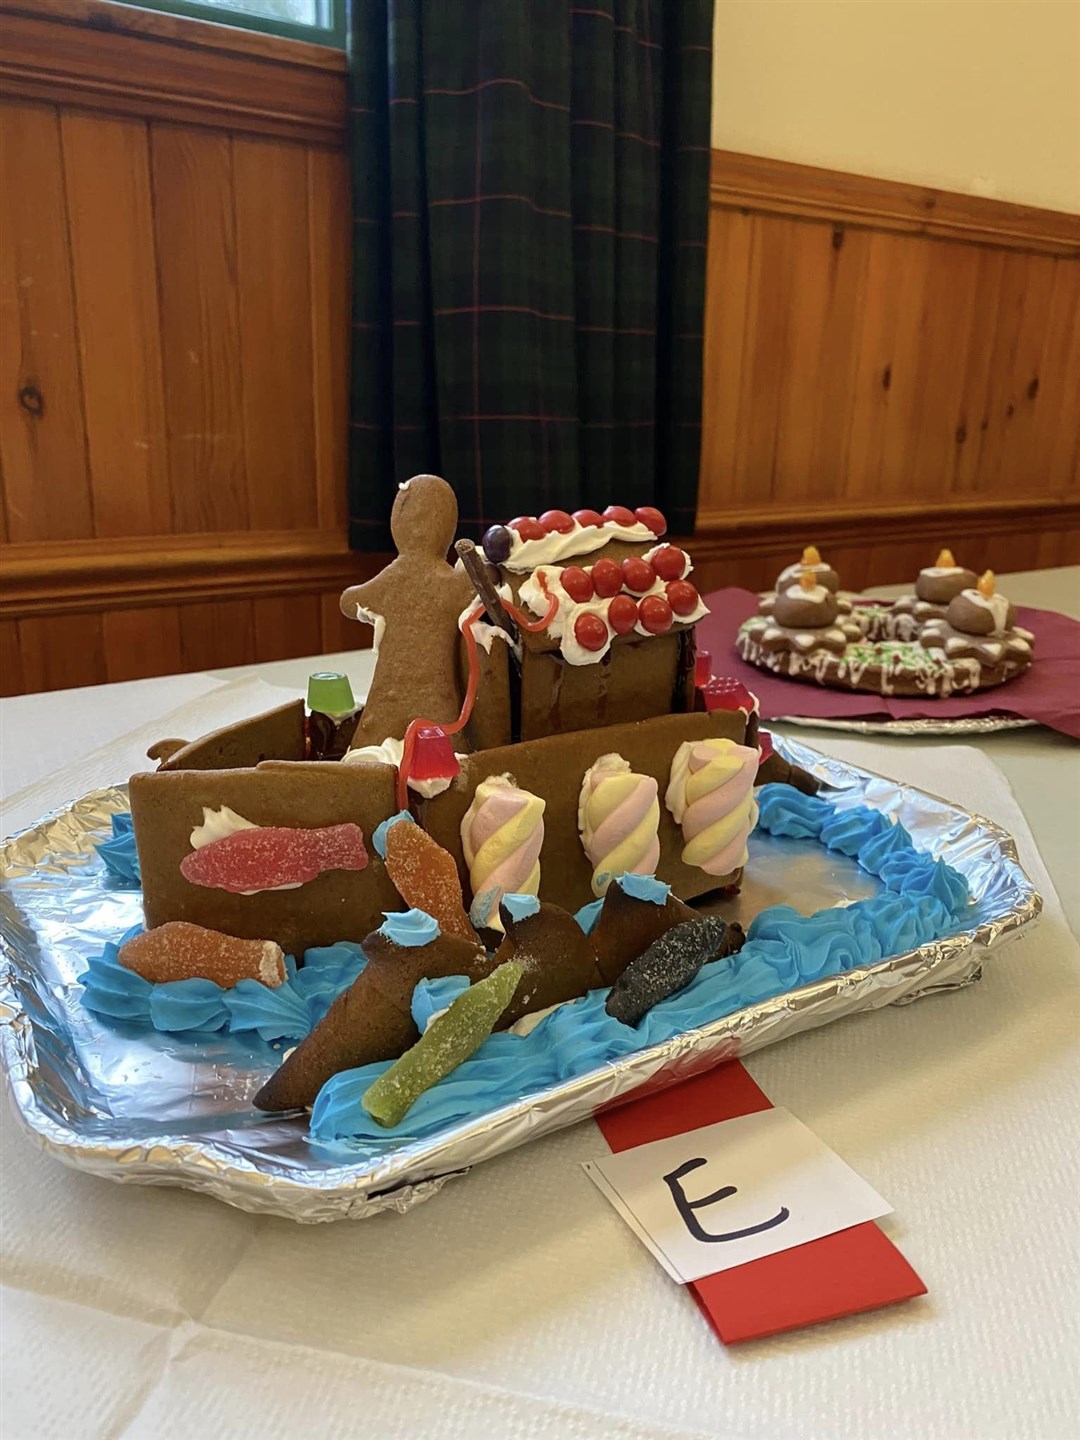 Leo Crisp Camp's gingerbread boat came 1st in the Anything But a House category.